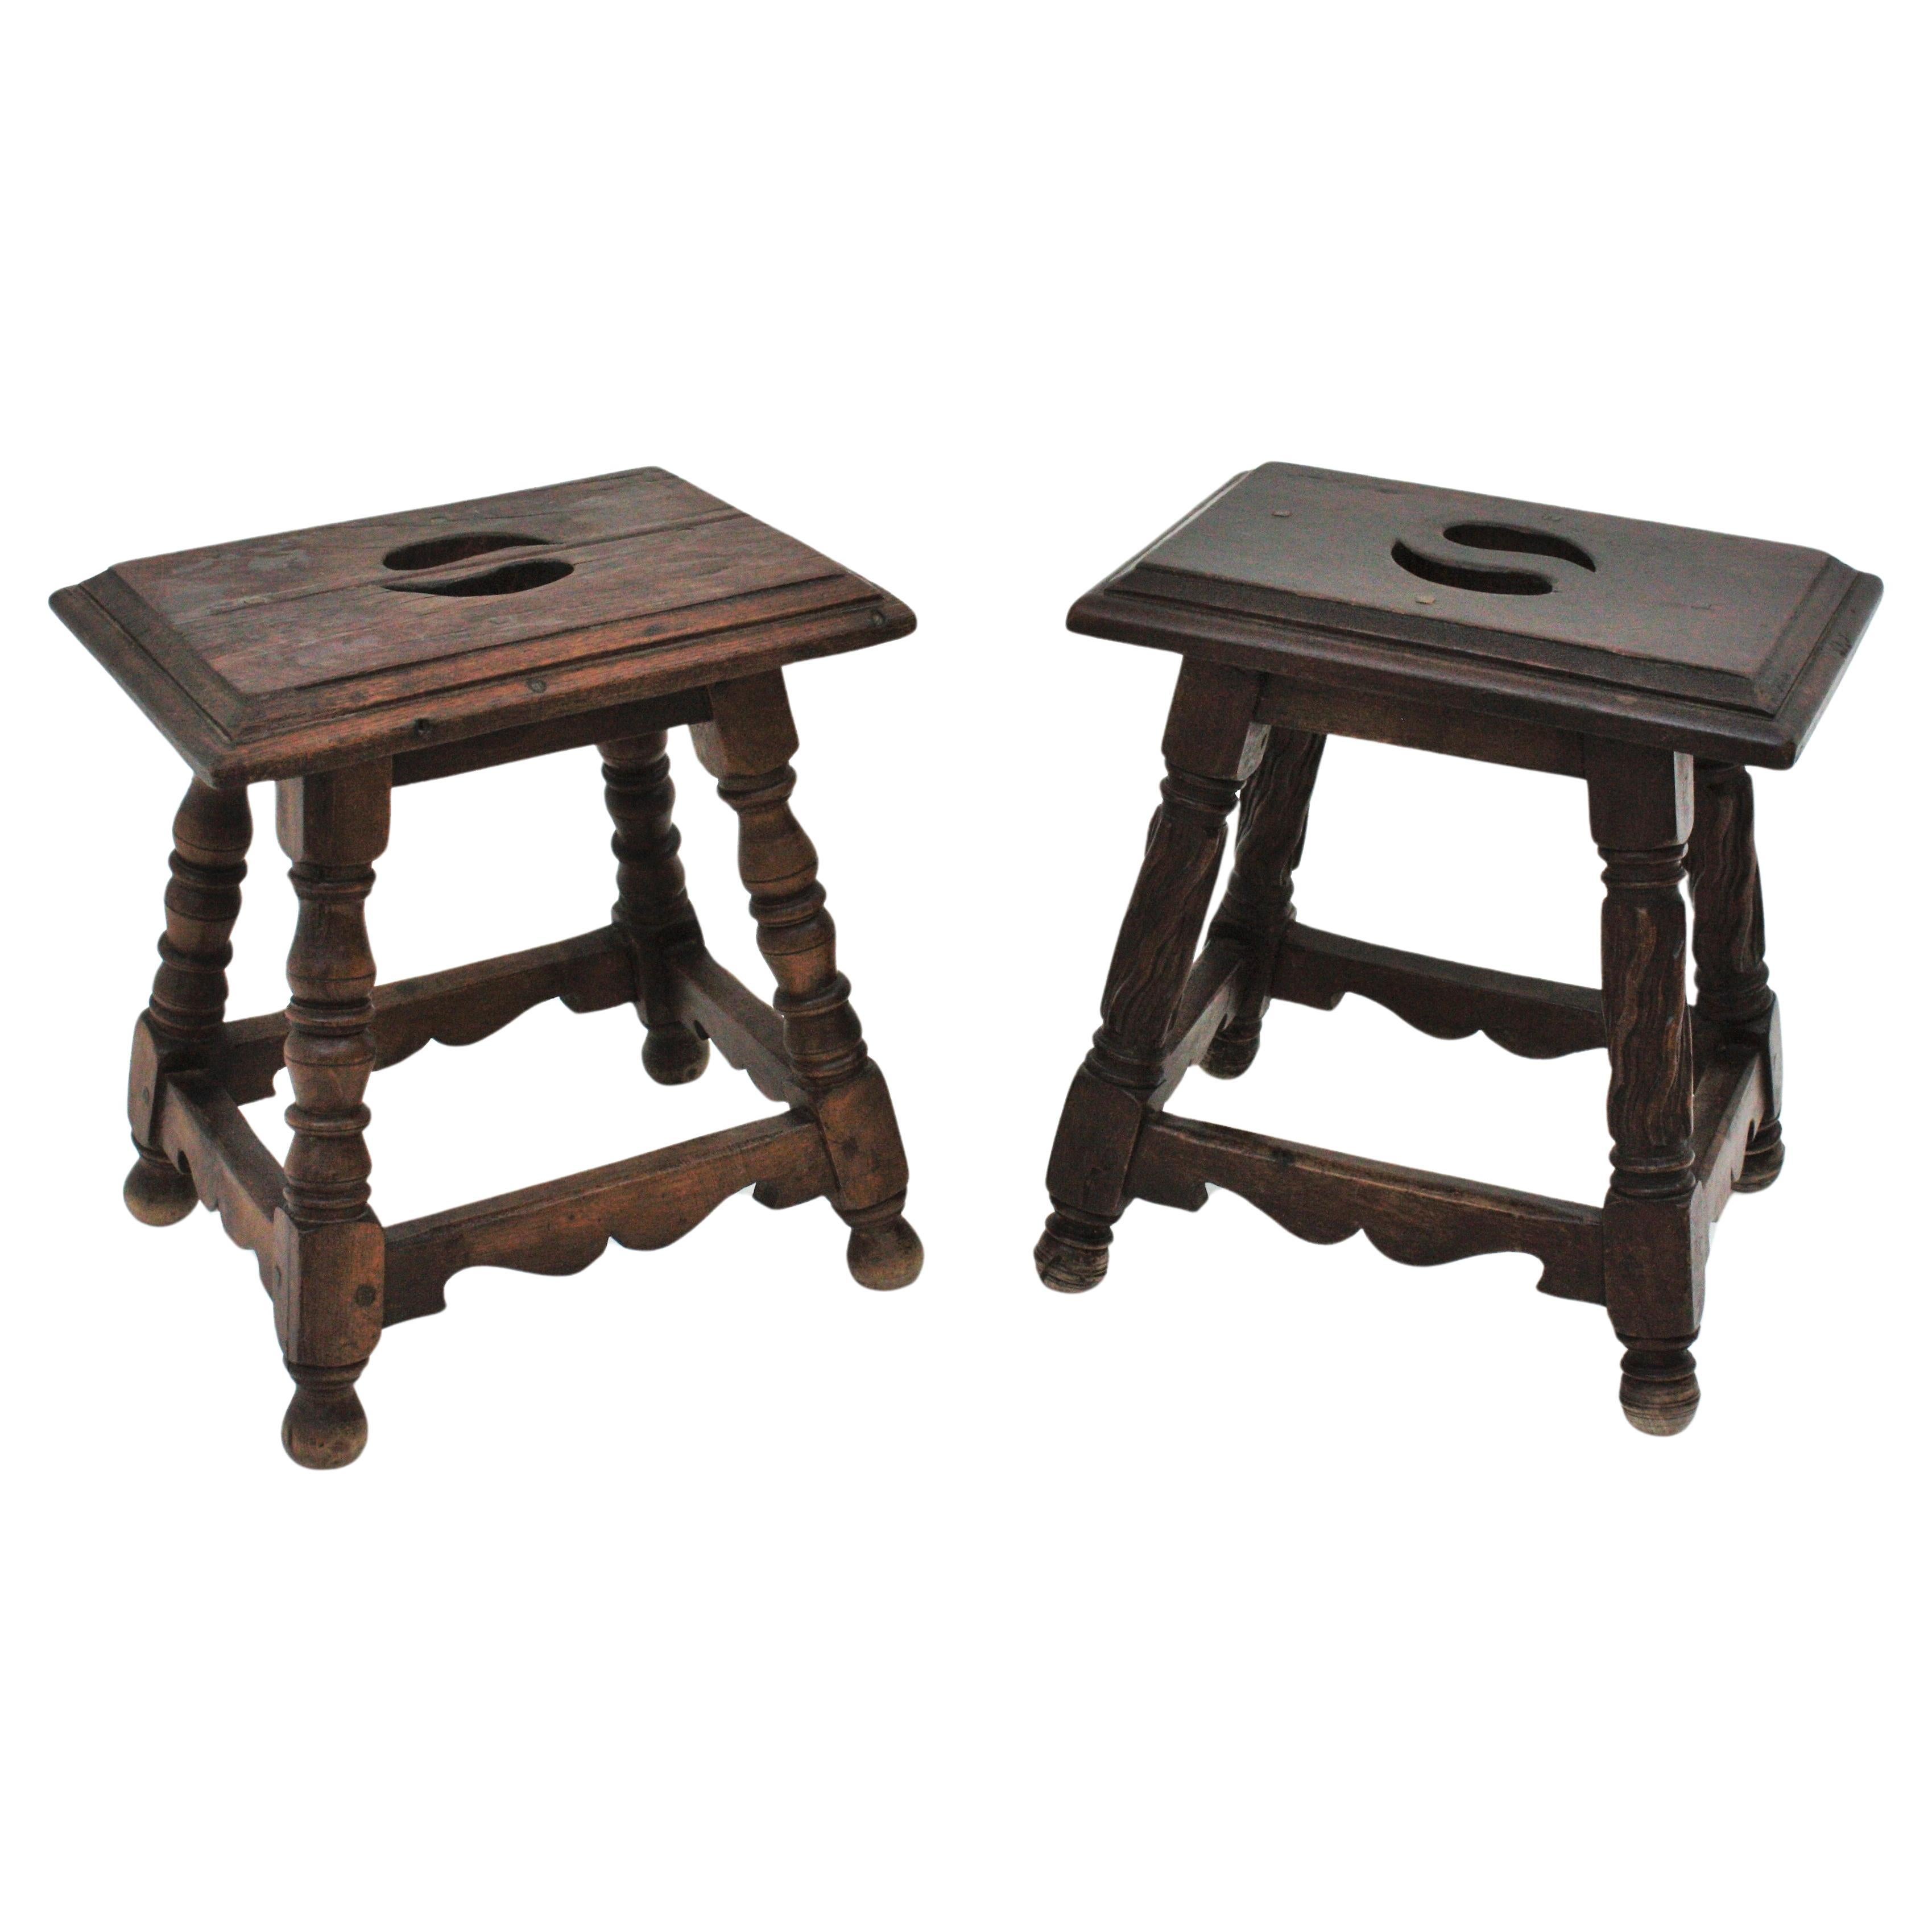 Pair of Spanish Colonial Side Tables / Stools in Carved Wood 